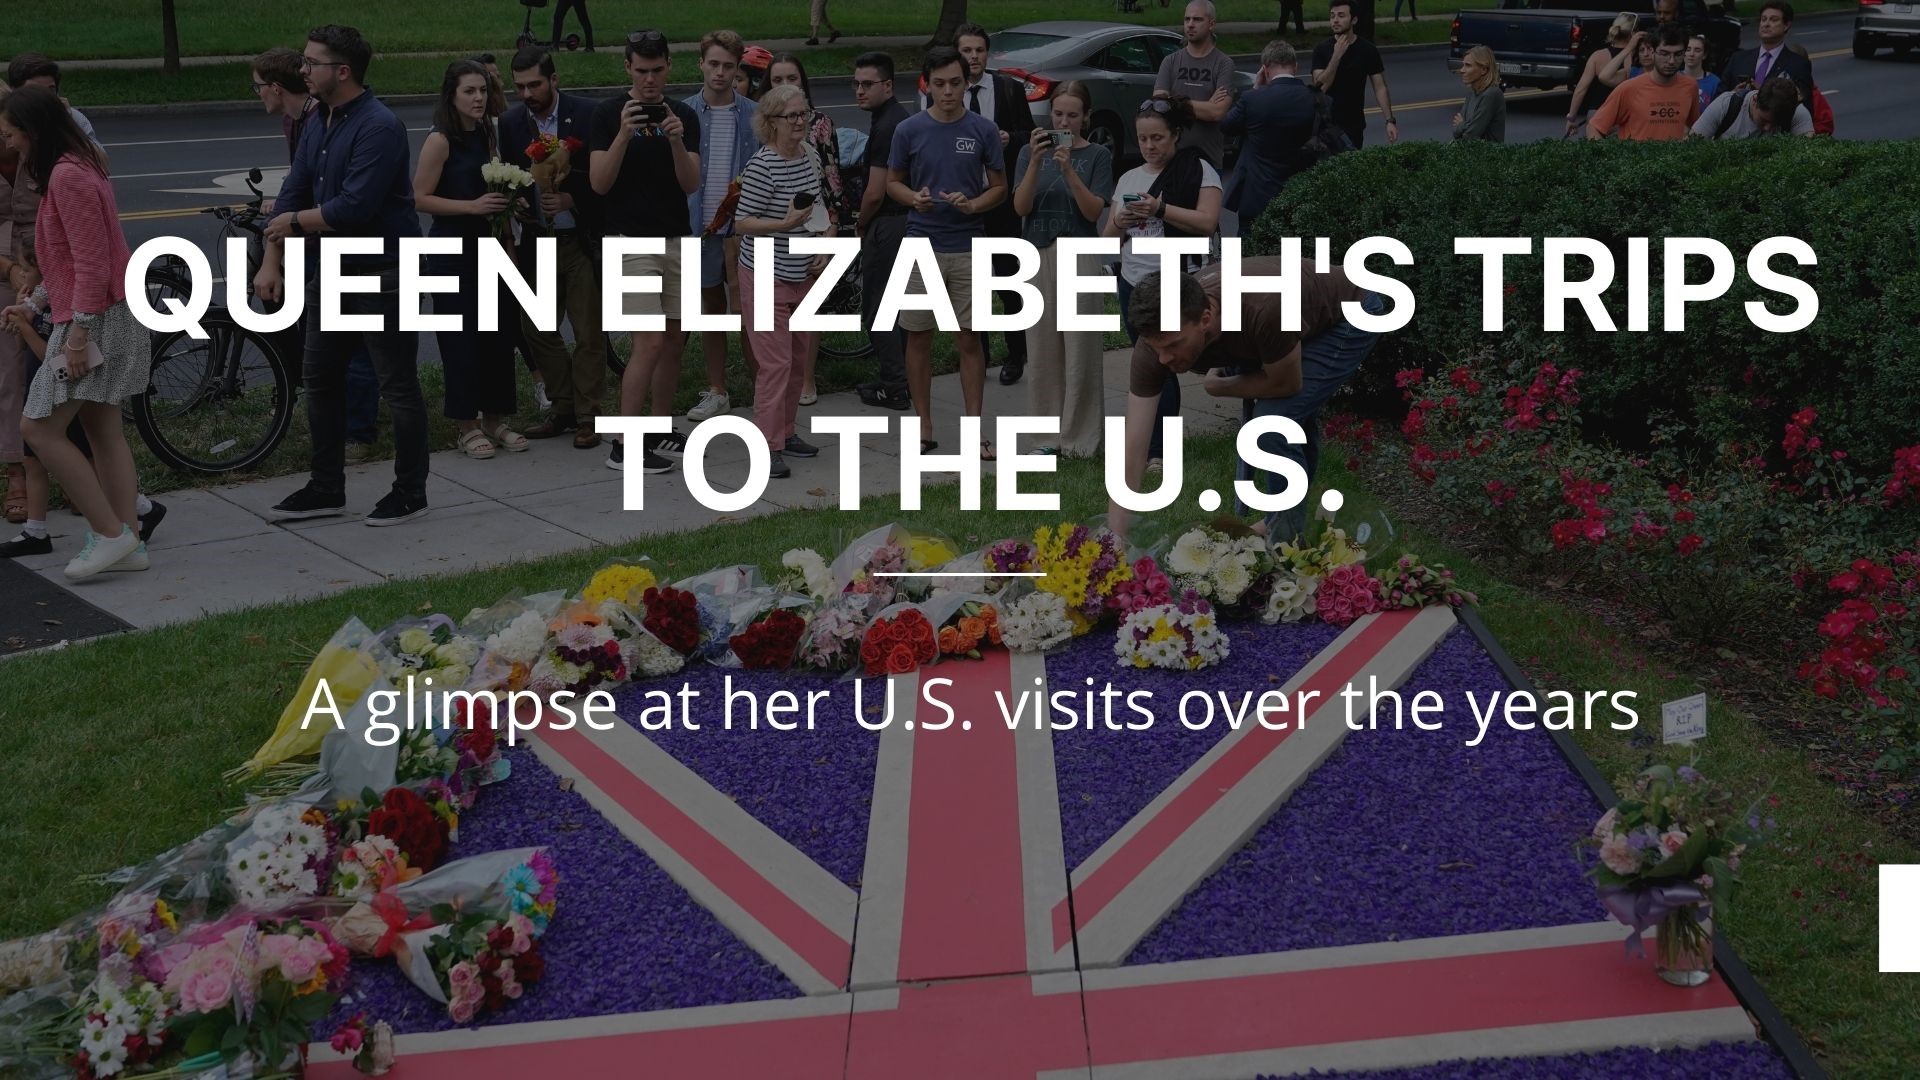 A look back at Queen Elizabeth II's life and legacy after her death at the age of 96. Also a glimpse into her visits to the U.S. over the years.